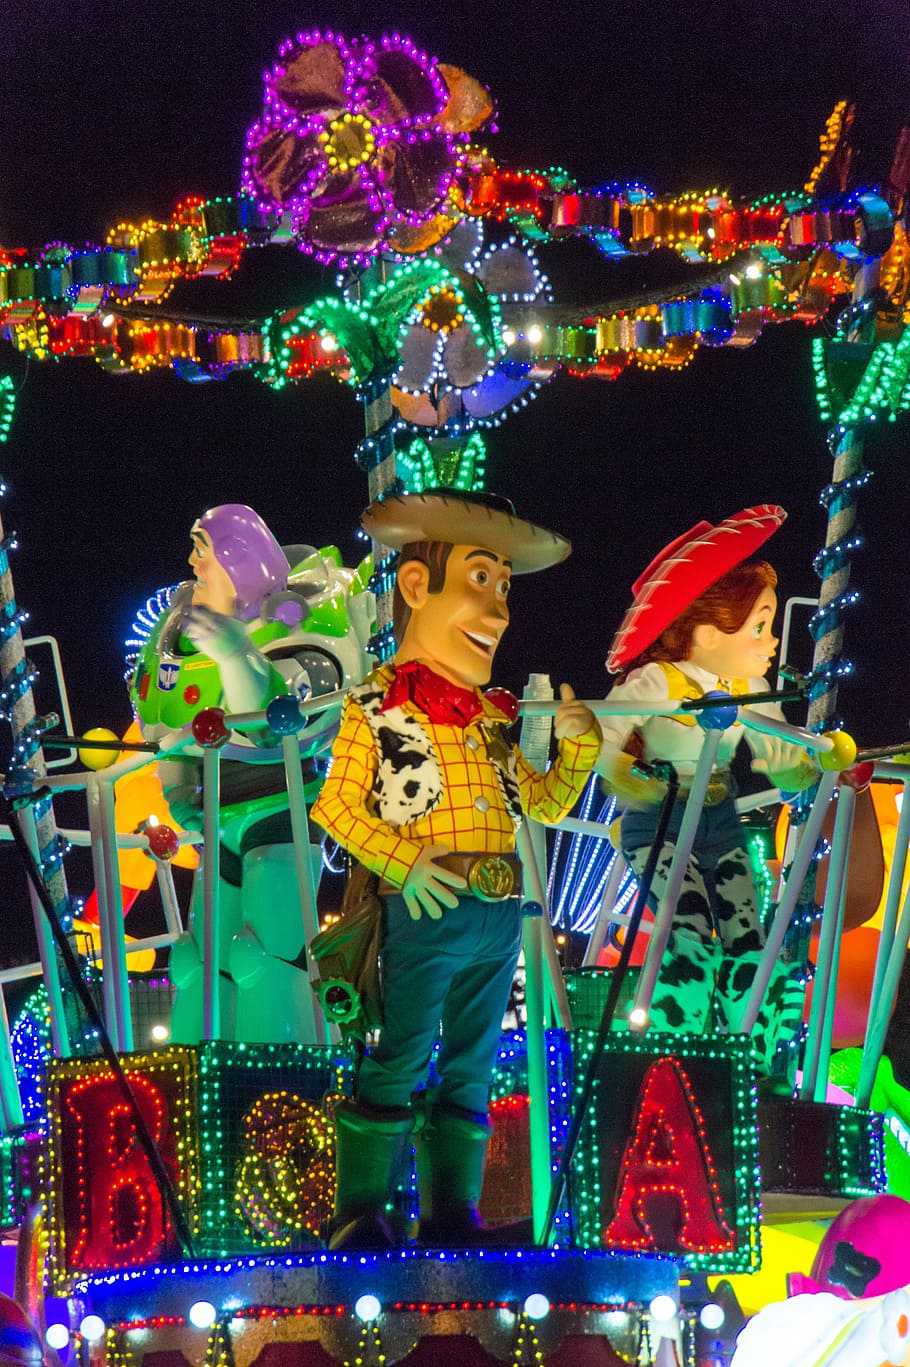 toy story mascots, disney, japan, parade, tokyo, toy's story, woody, celebration, multi Colored, cultures